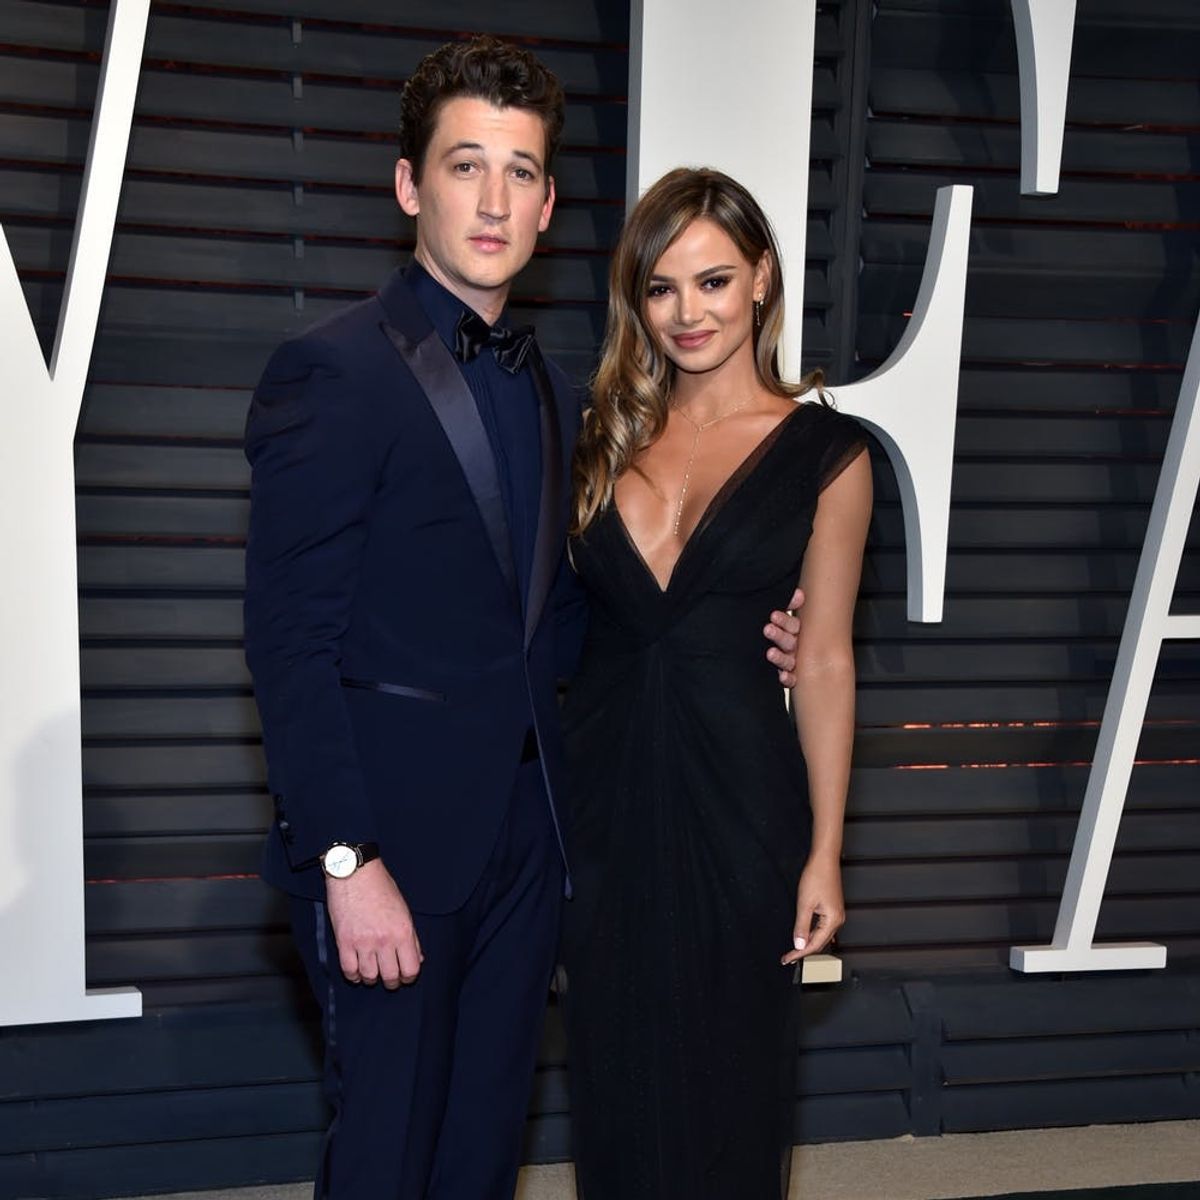 Miles Teller Is Engaged to Keleigh Sperry — and Her Ring Is Stunning!